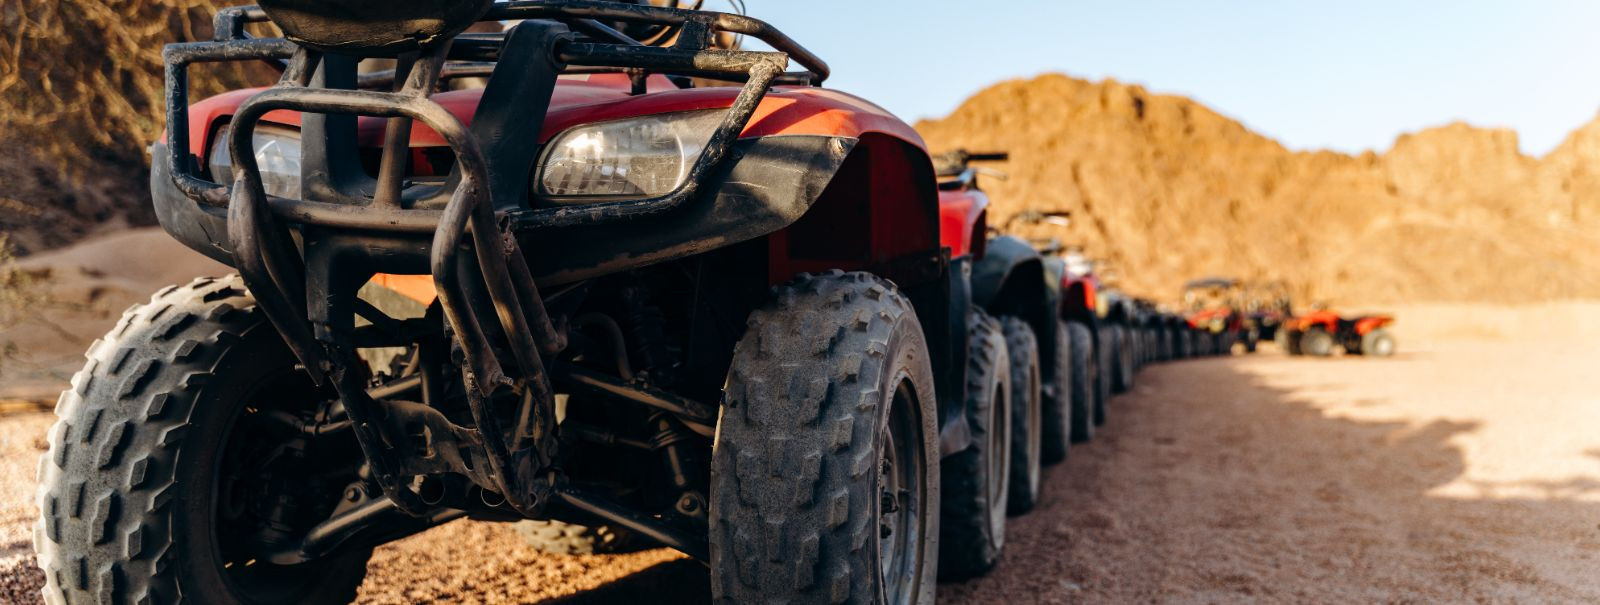 Maintaining your ATV is crucial to ensure its longevity, safety, and performance. Regular maintenance can prevent breakdowns, extend the life of your vehicle, a